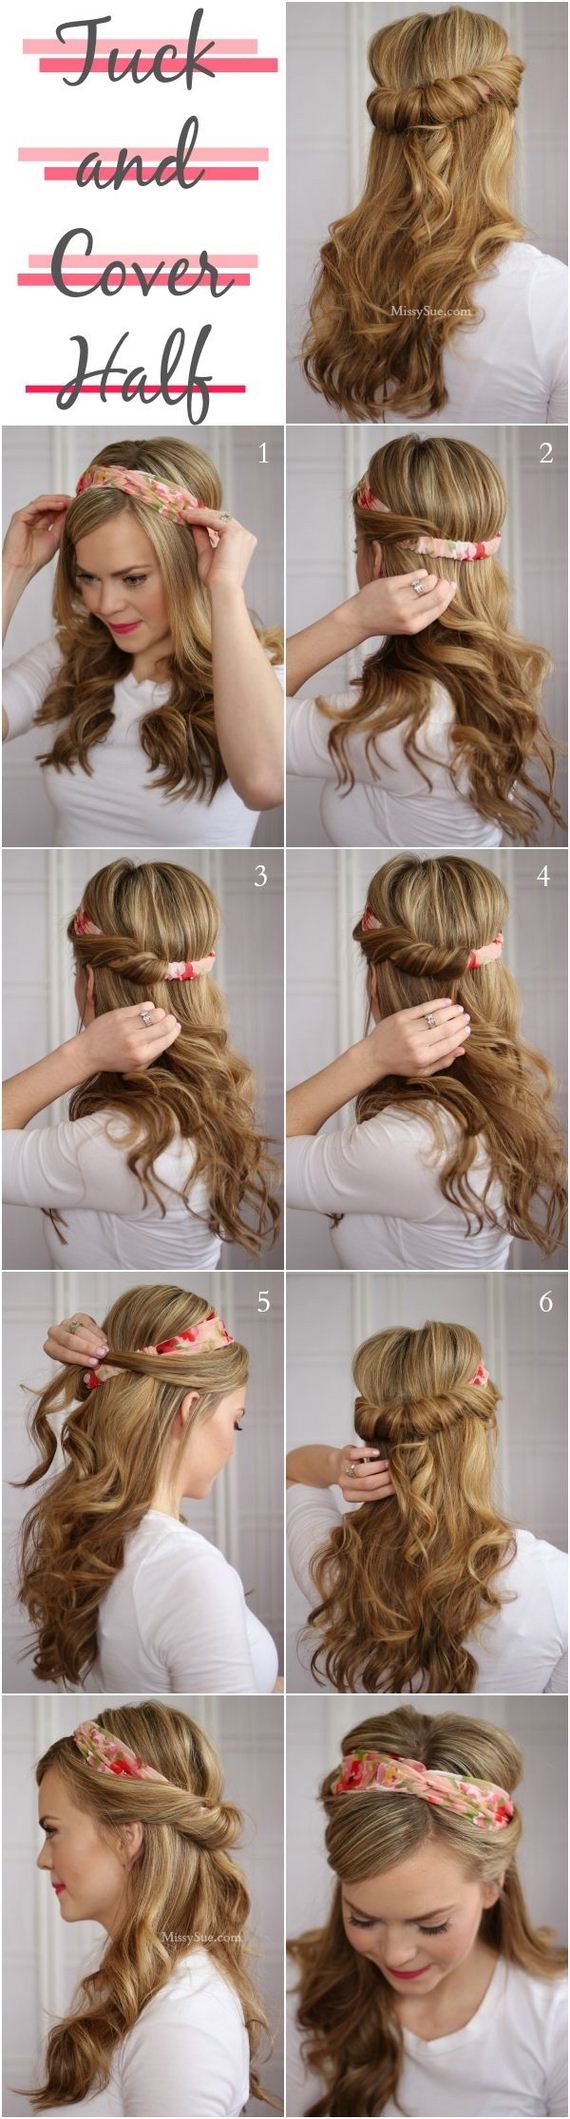 16-Easy-Hairstyles